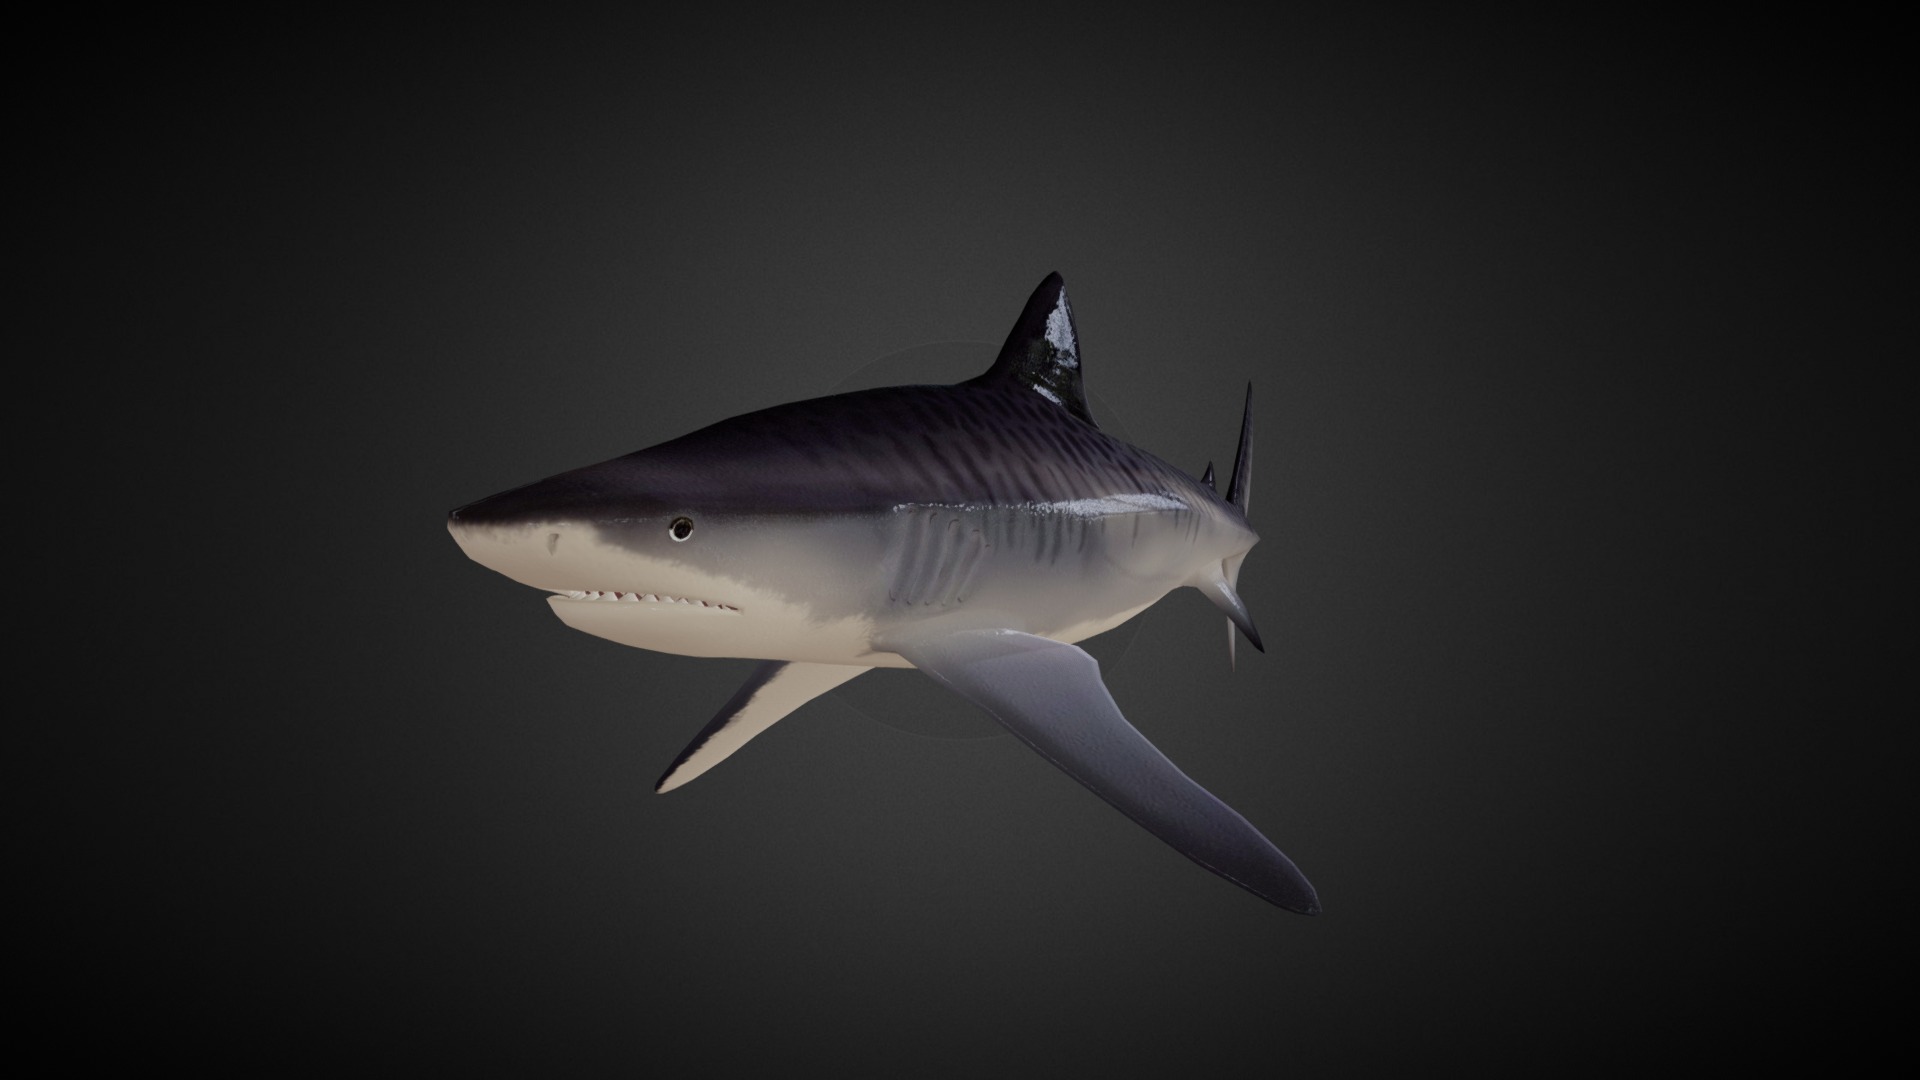 3D model Tiger Shark - This is a 3D model of the Tiger Shark. The 3D model is about a shark swimming in the water.